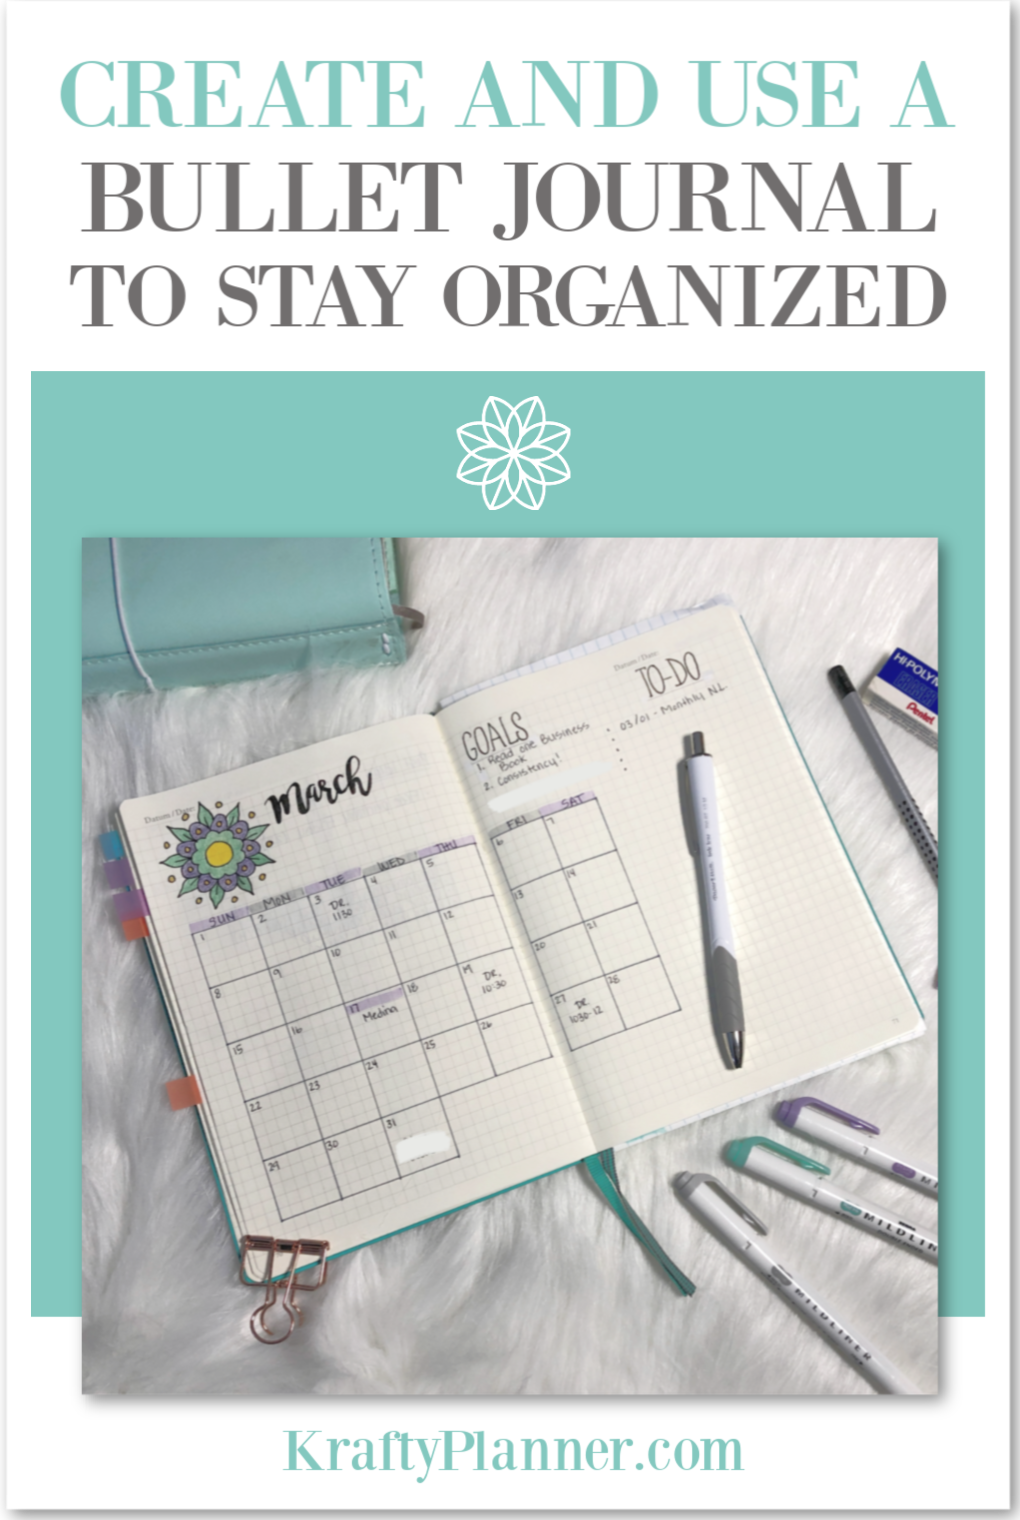 Create and Use a Bullet Journal to Stay Organized PIN 3.png